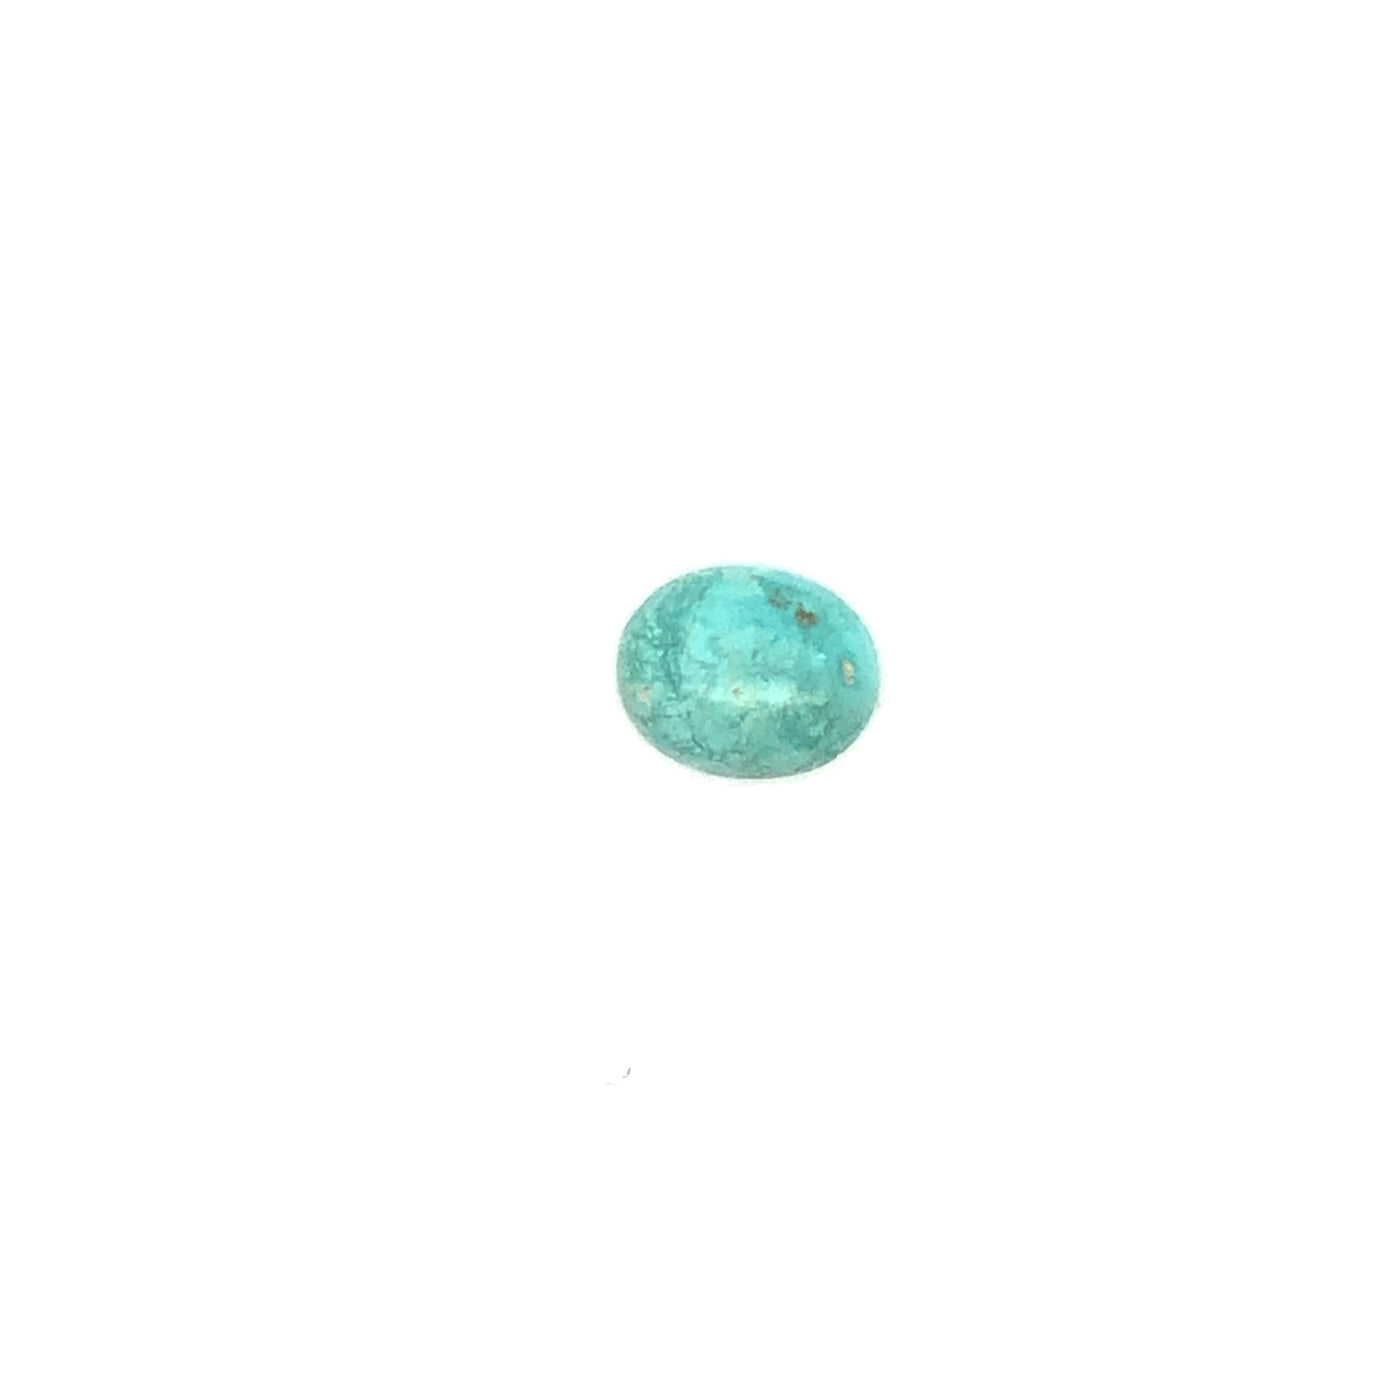 Loose Narooma Turquoise Oval Shaped 3.68Ct Blue